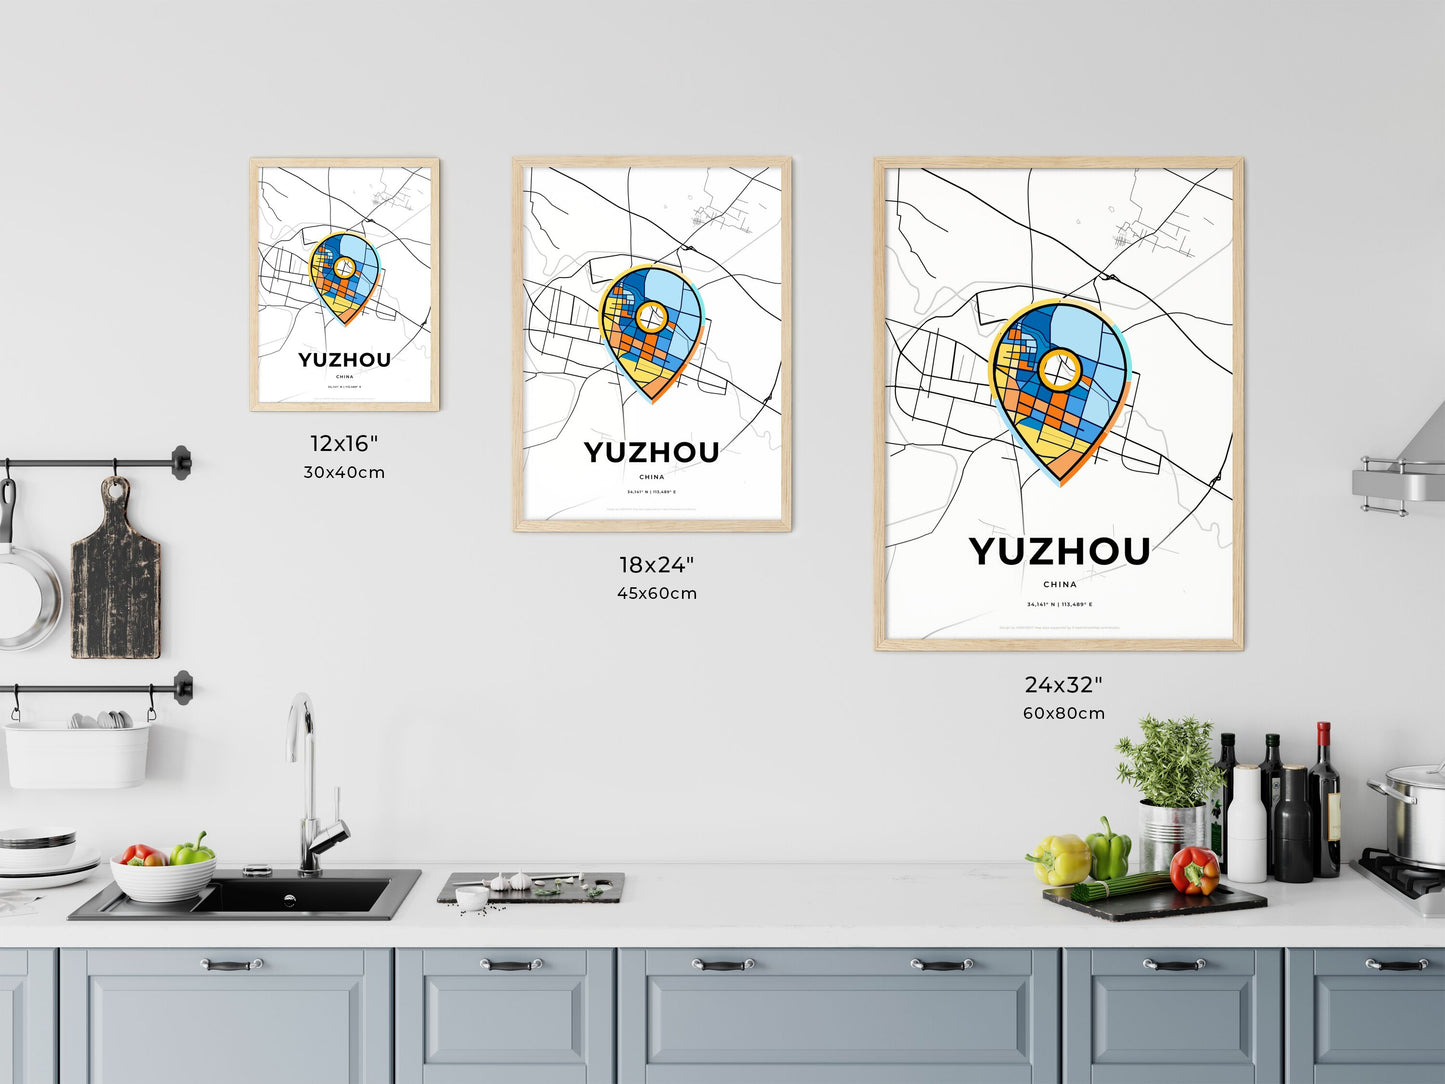 YUZHOU CHINA minimal art map with a colorful icon. Where it all began, Couple map gift.